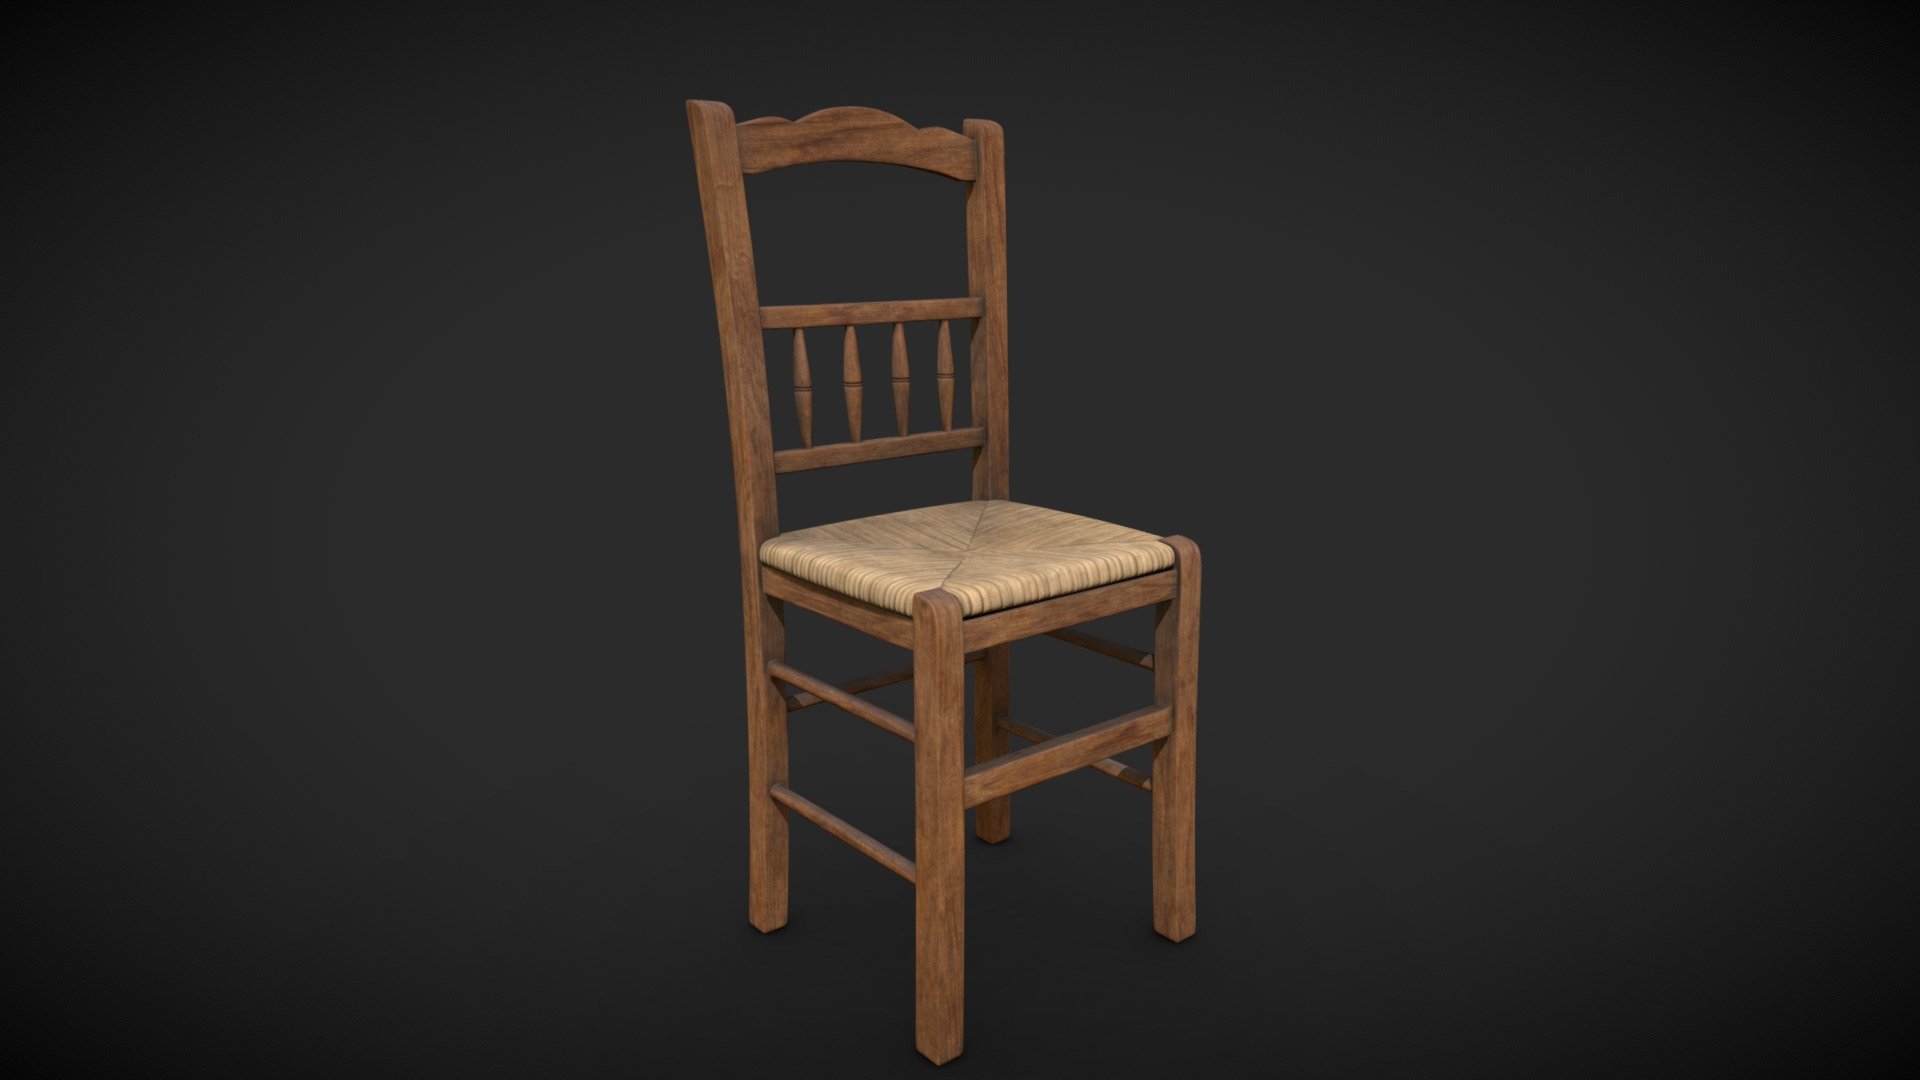 3D model of a wooden chair (usually found in taverns). The modeling was done in 3ds Max and the texturing in Substance Painter. All the topology is in quads 3d model